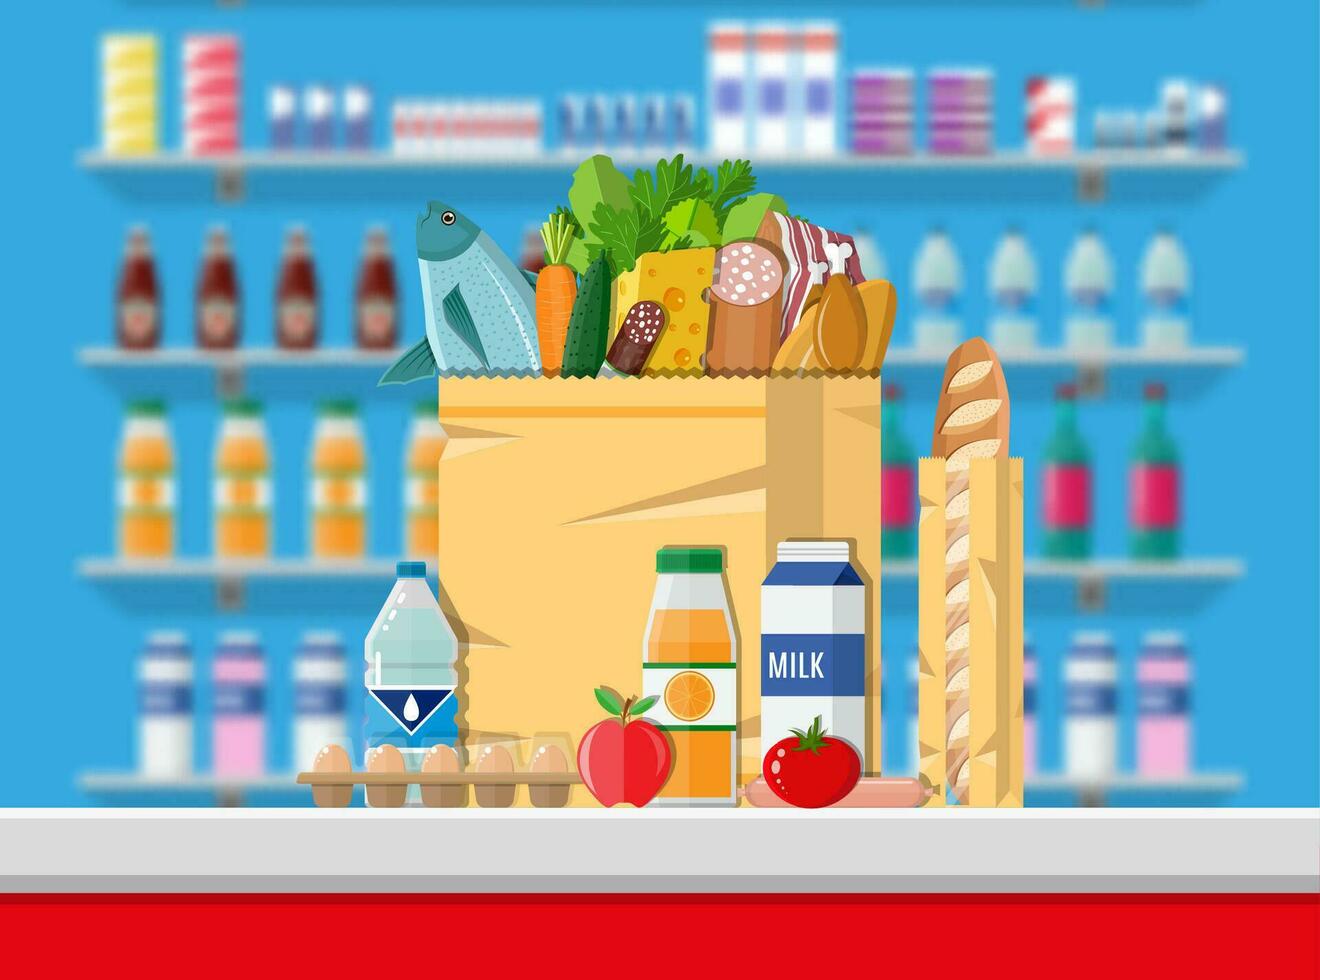 Supermarket interior. Cashier counter workplace. Food and drinks. Shelves with products. Vector illustration in flat style